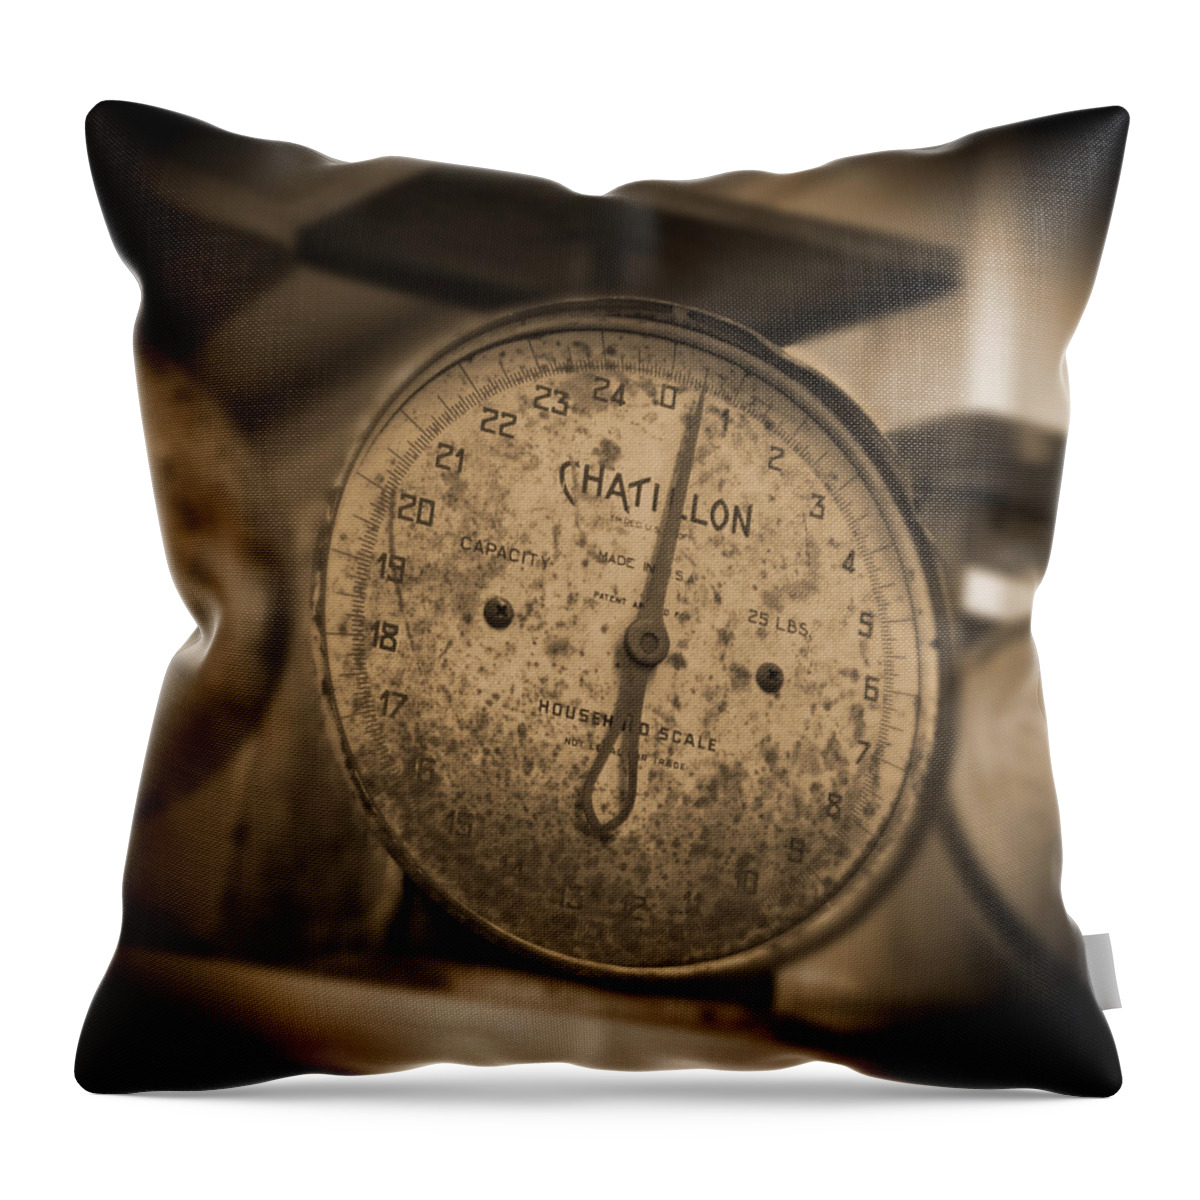 Scale Throw Pillow featuring the photograph Scale by Mike McGlothlen